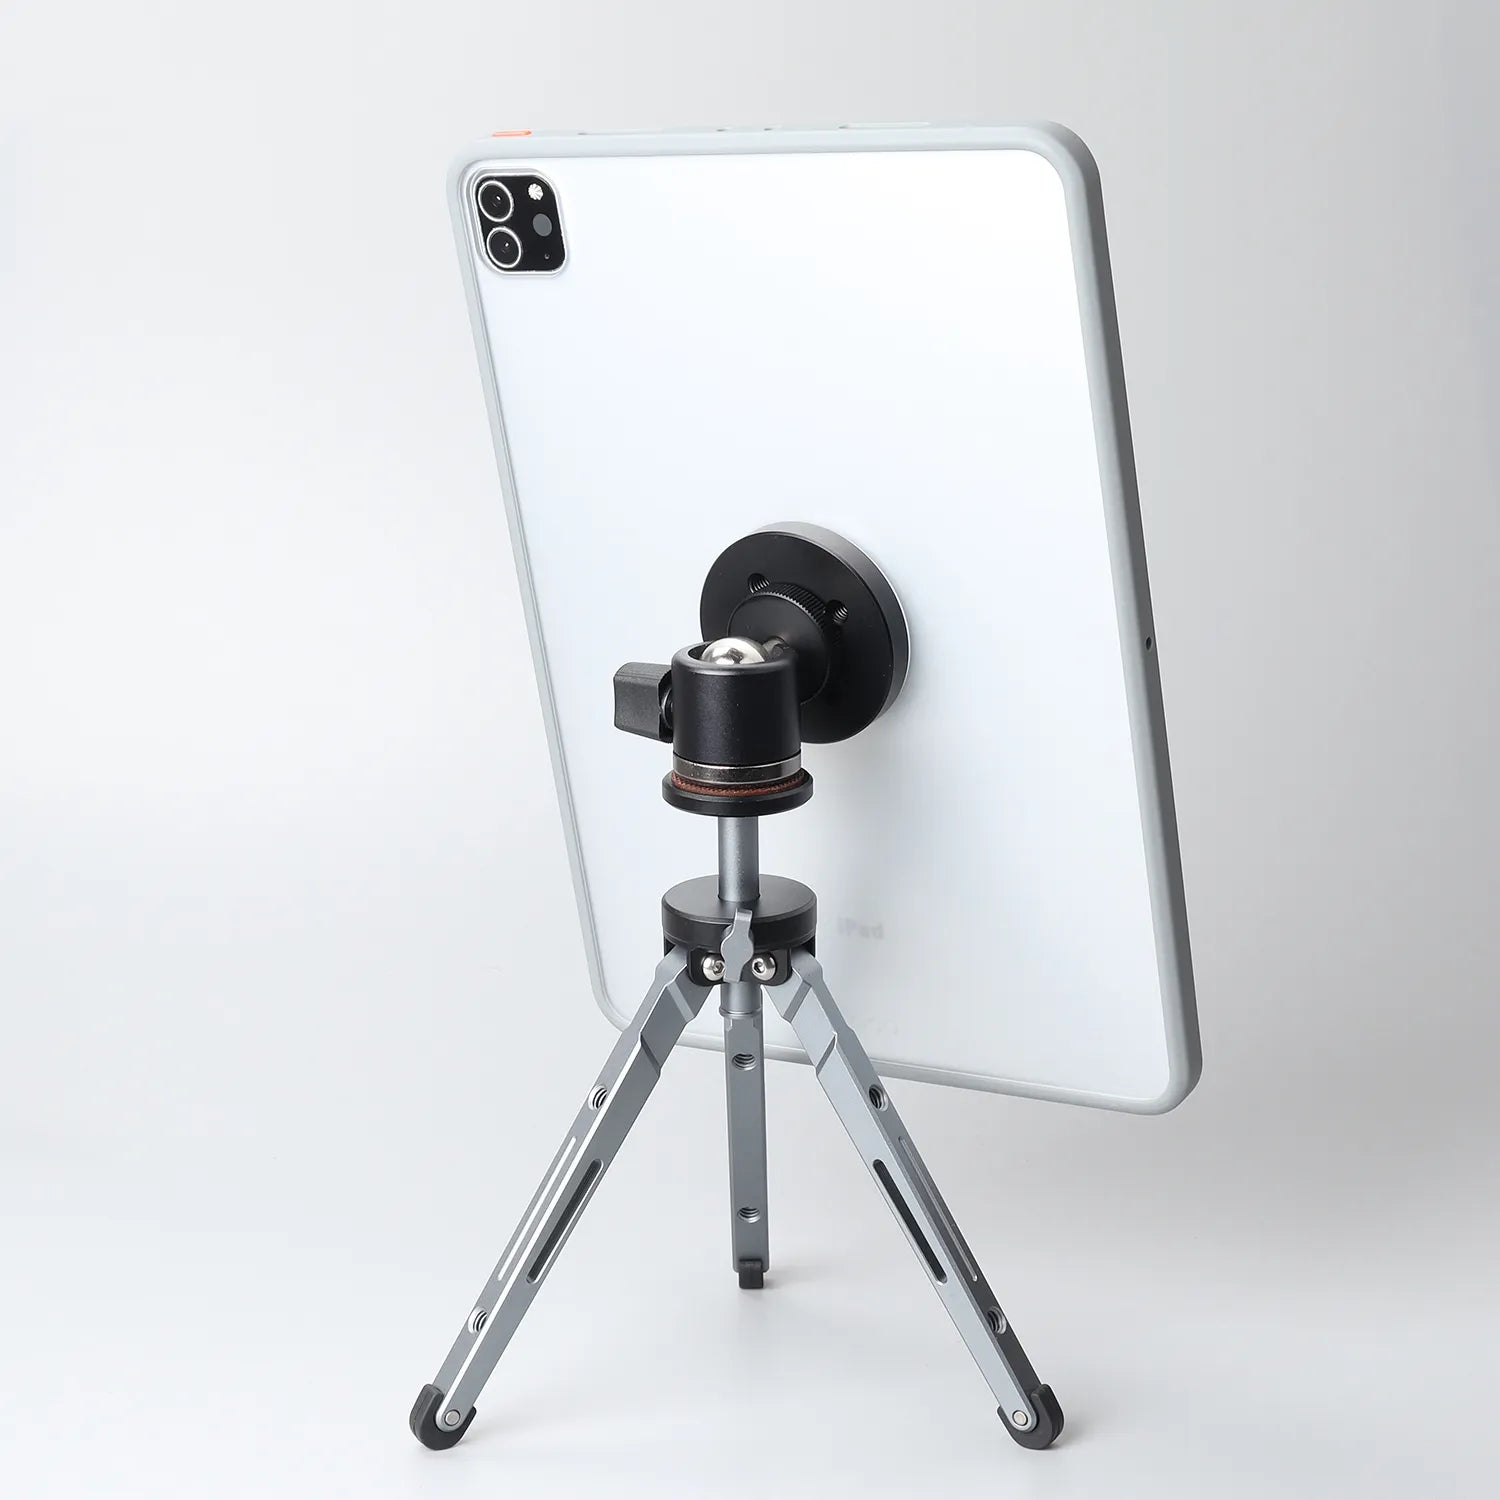 iPad Pro case is equipped with a magnetic tripod stand